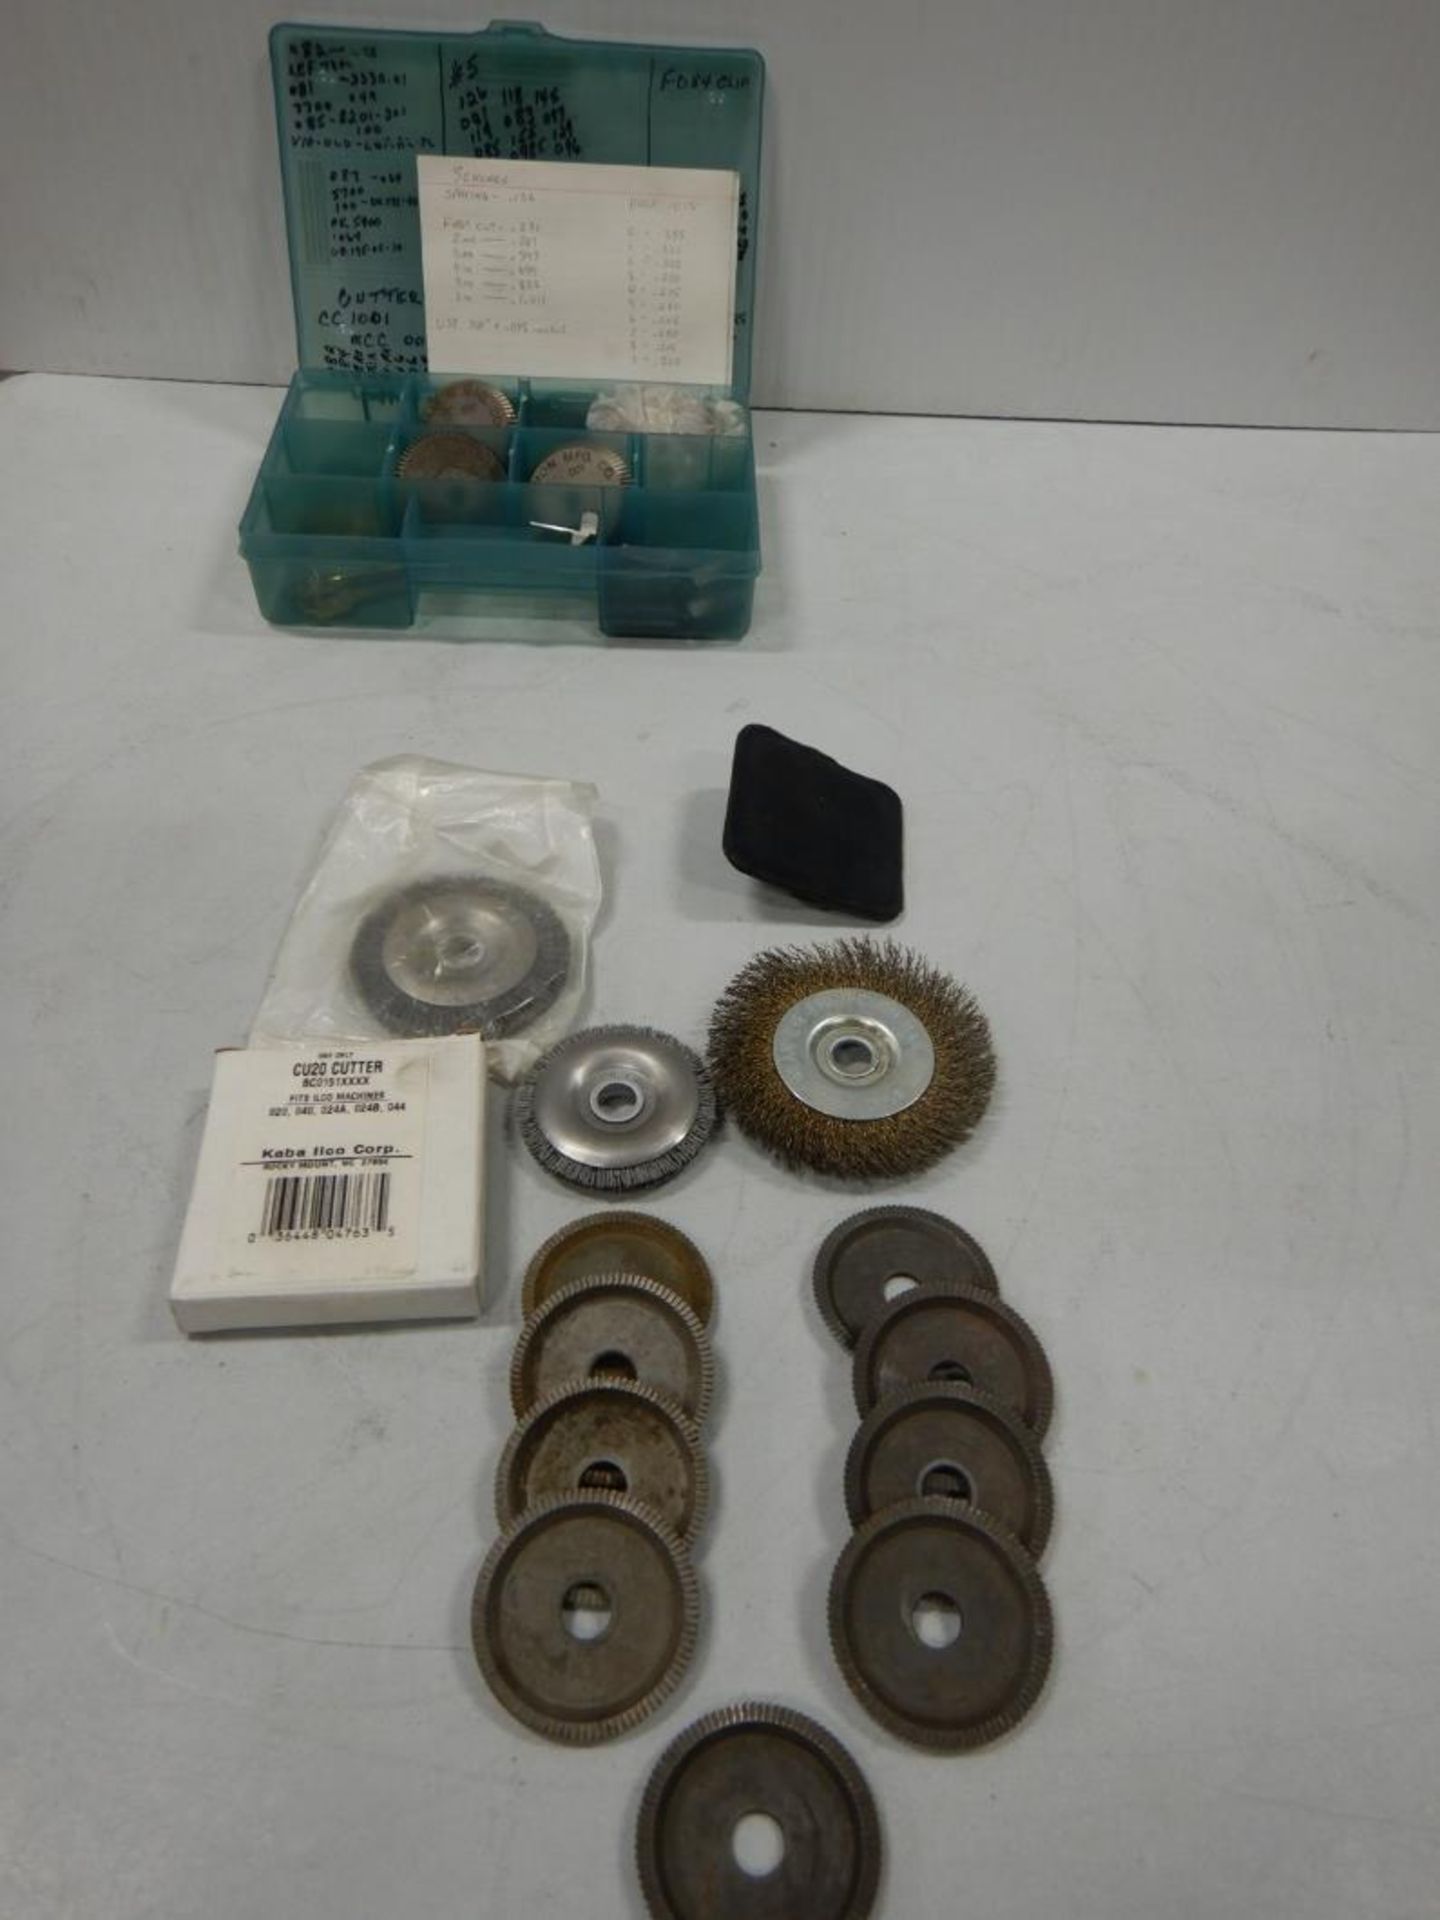 L/O ASSORTED KEY CUTTING DISCS AND HARDWARE - Image 3 of 11